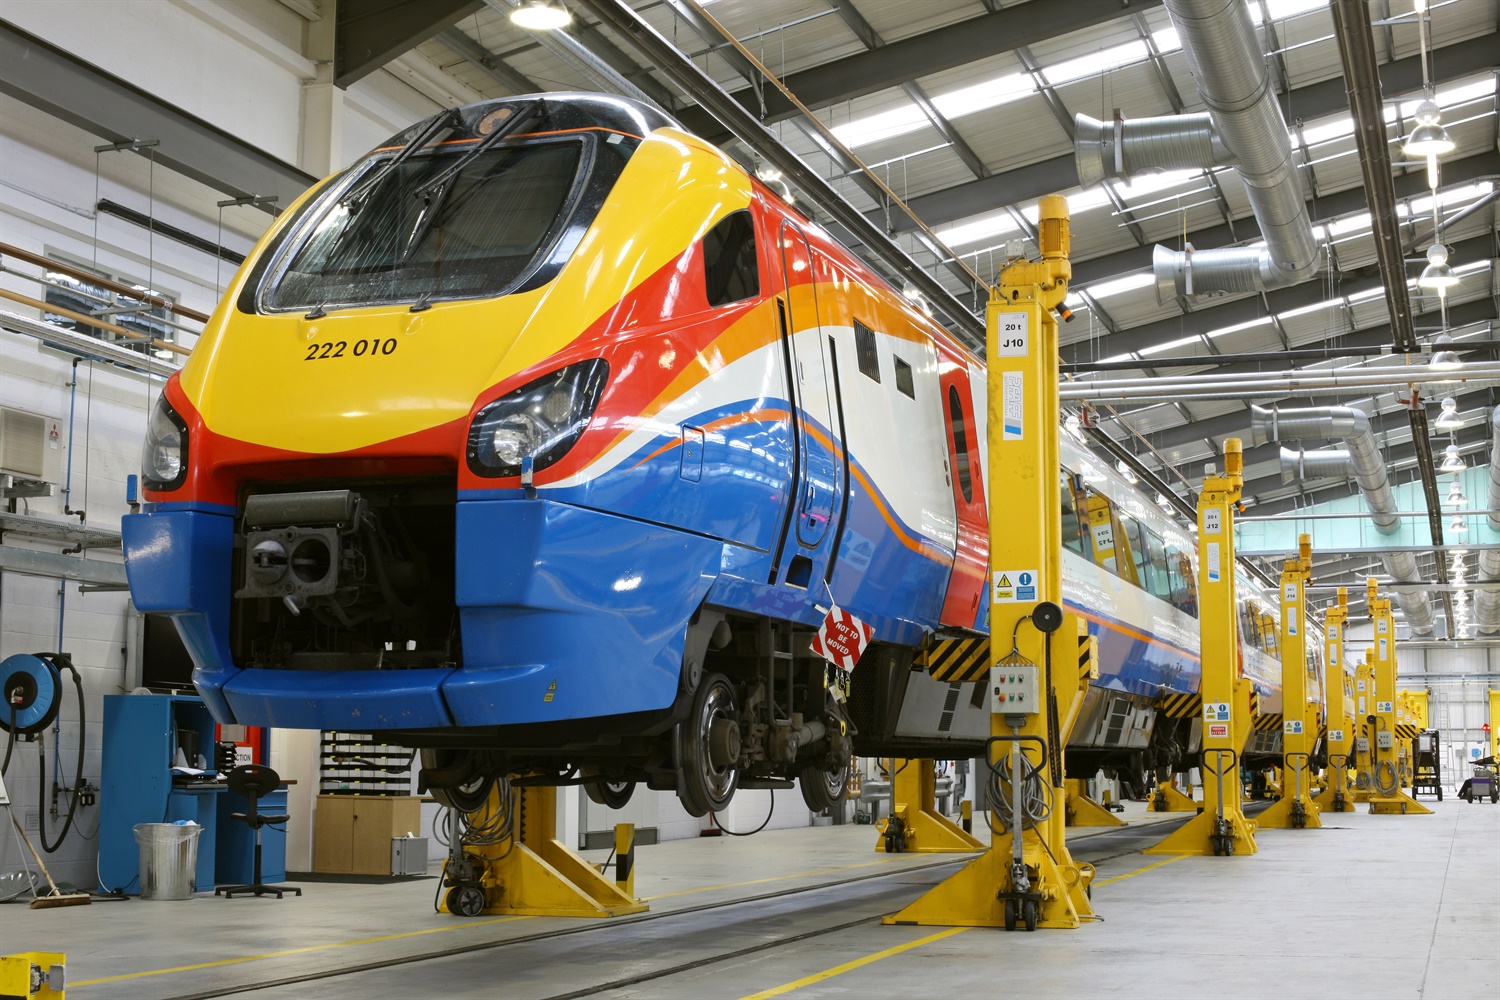 East Midlands Trains extends maintenance contract with Bombardier